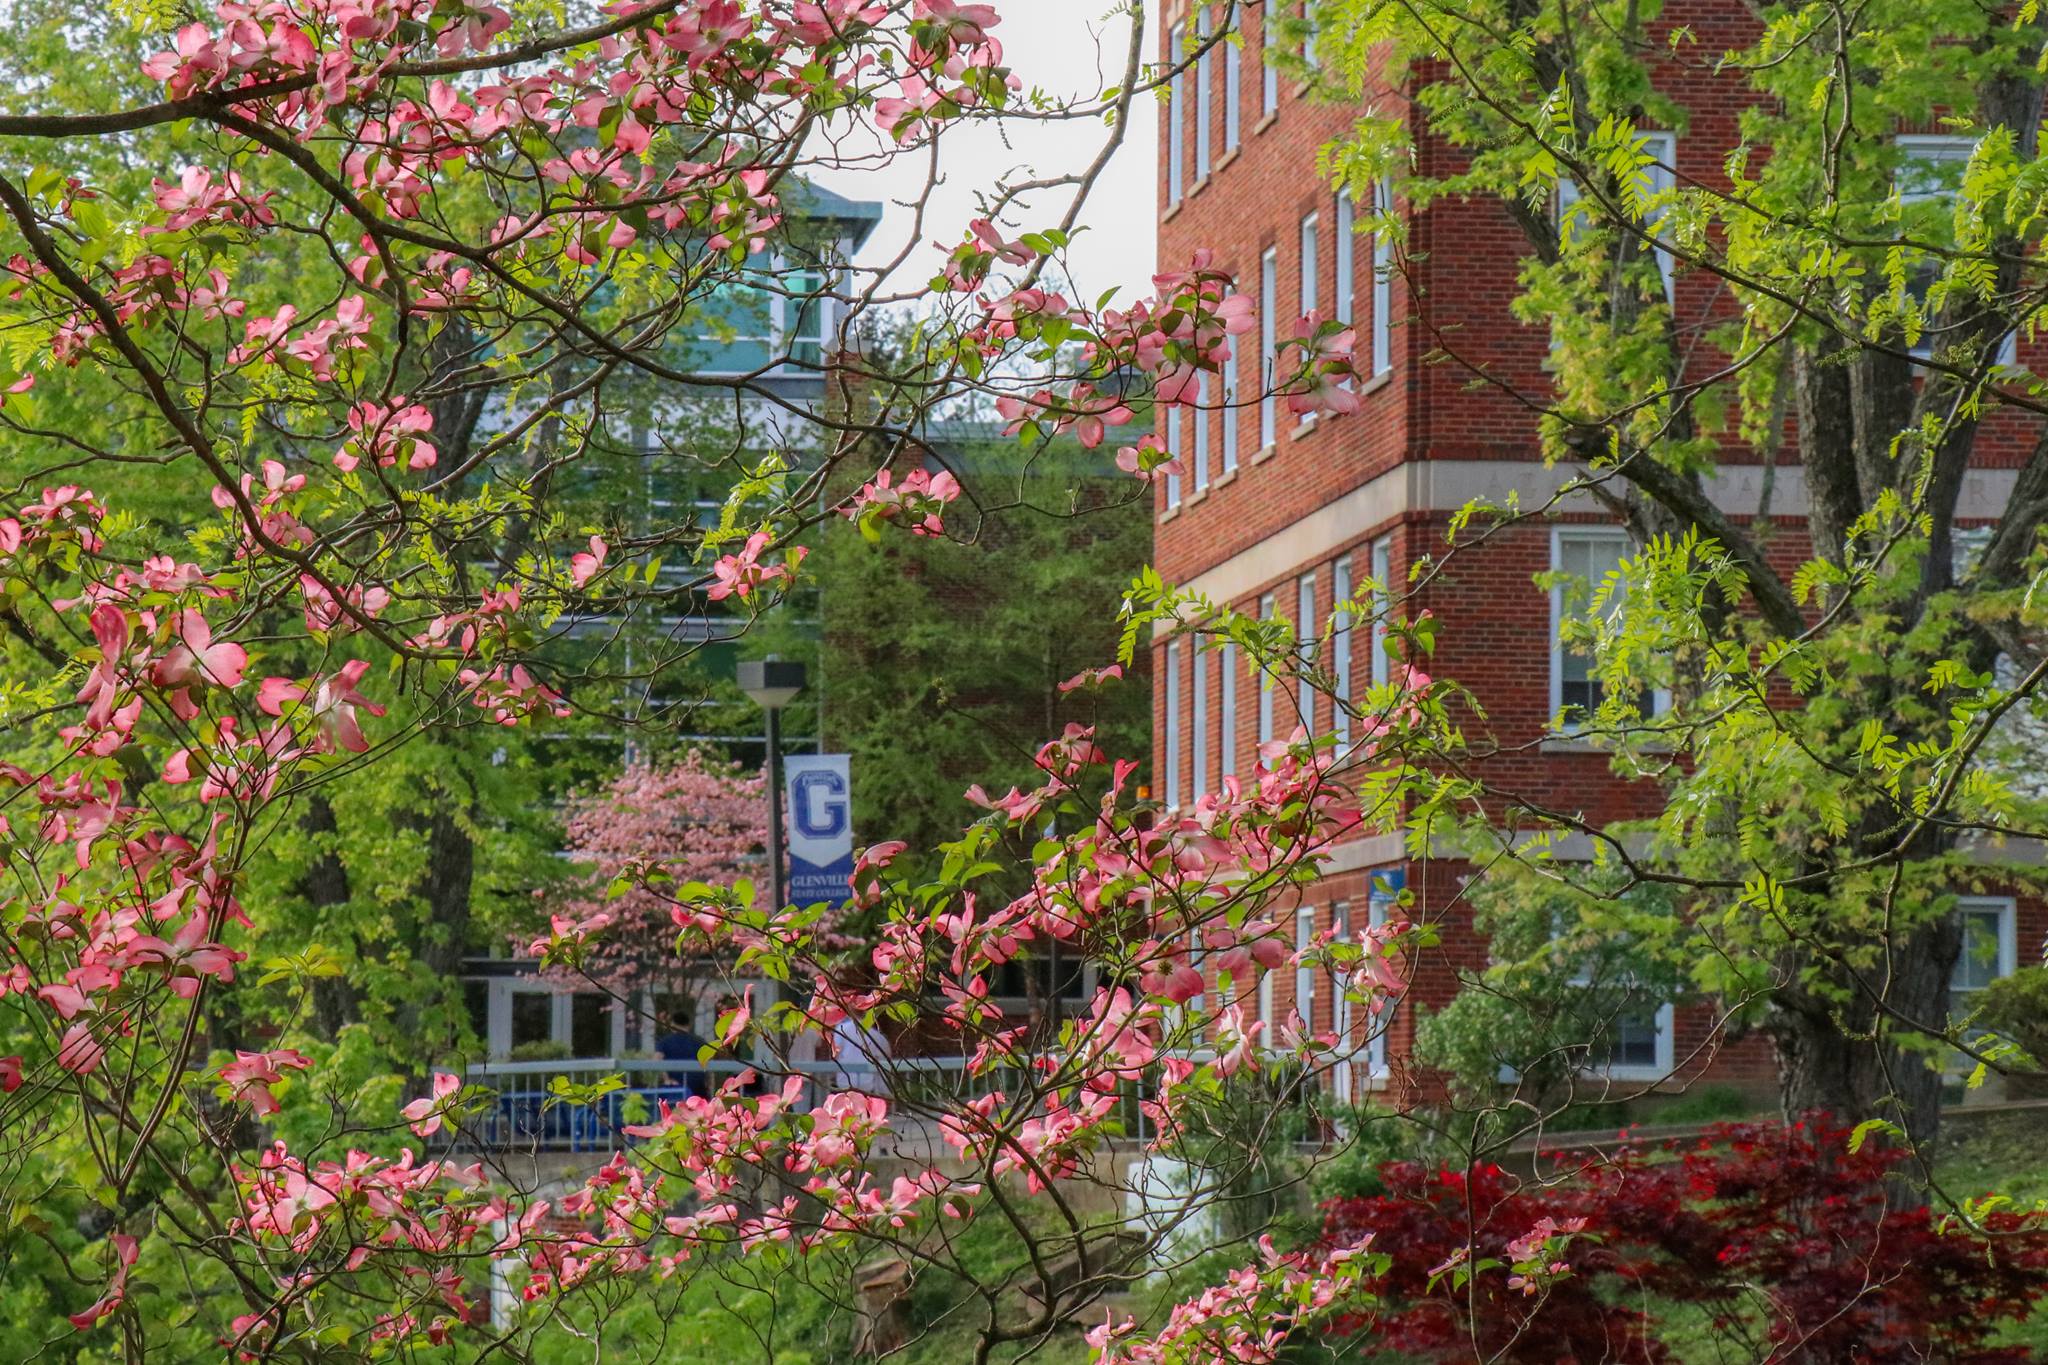 A bright blue "Glenville State College" banner peaks through the trees which are covered with pink blossoms and bright green new leaves.